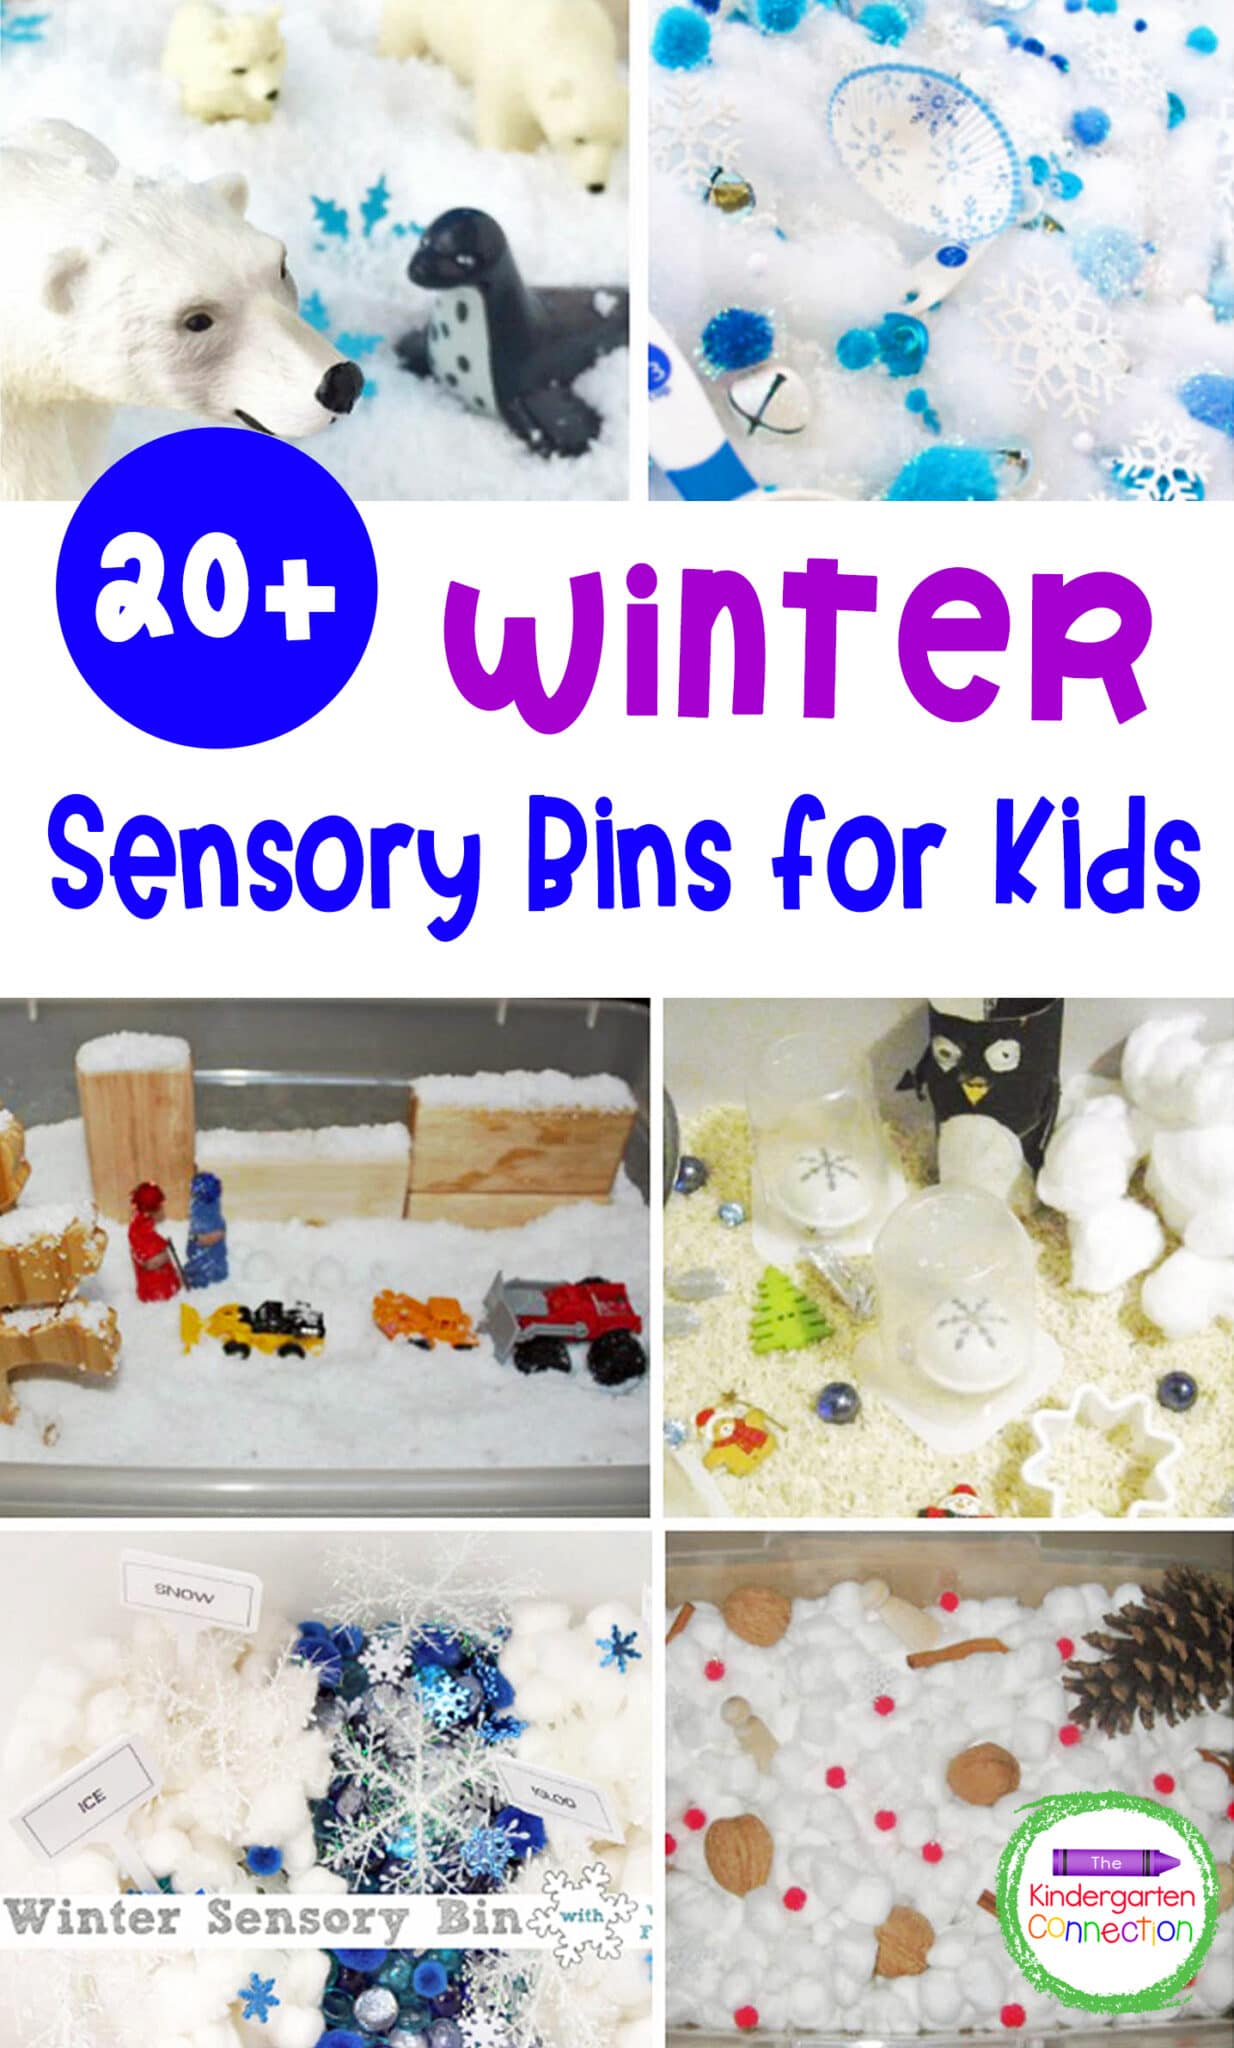 Sensory bins are fun and so engaging for sensory play! These winter sensory bins for kids are the perfect hands-on winter activity!